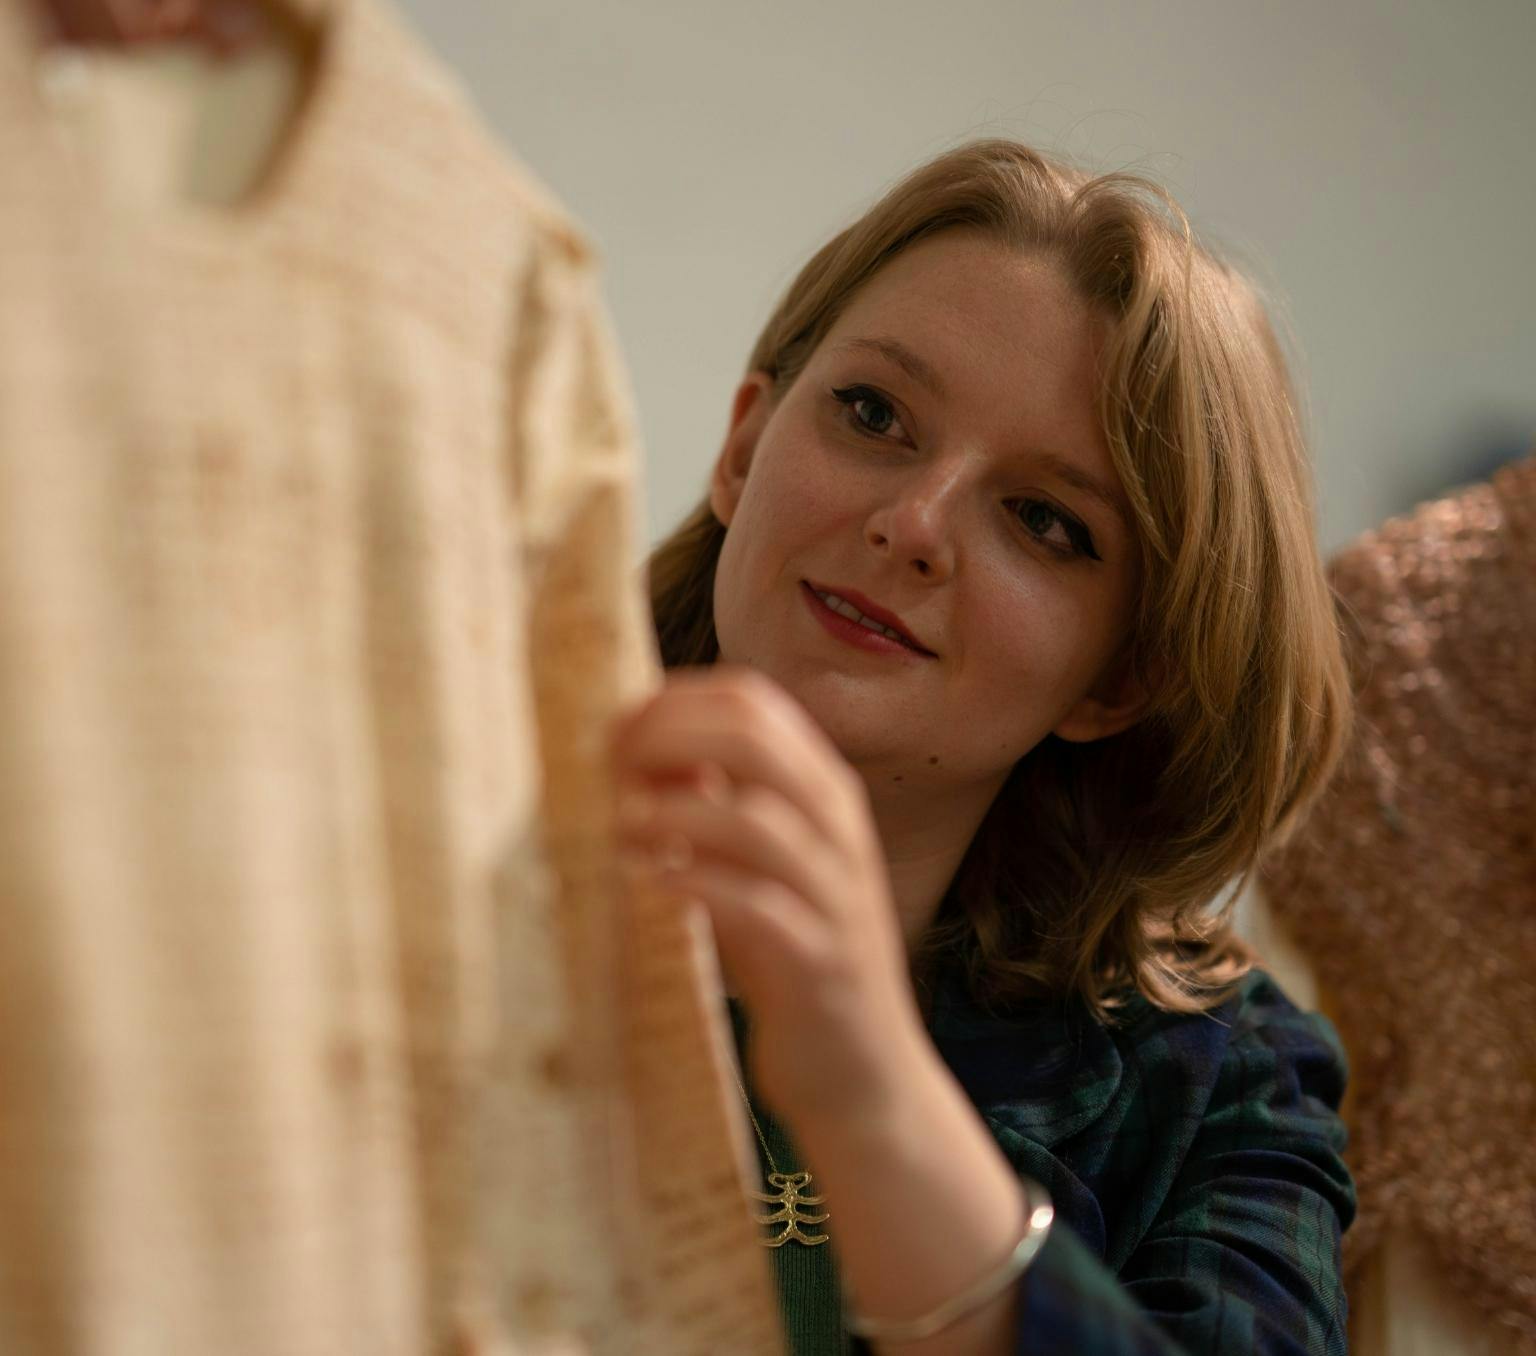 Saskia Morris looks closely at a cream dress, which is part of her artwork. He hand gently touches the sleeve of the dress.